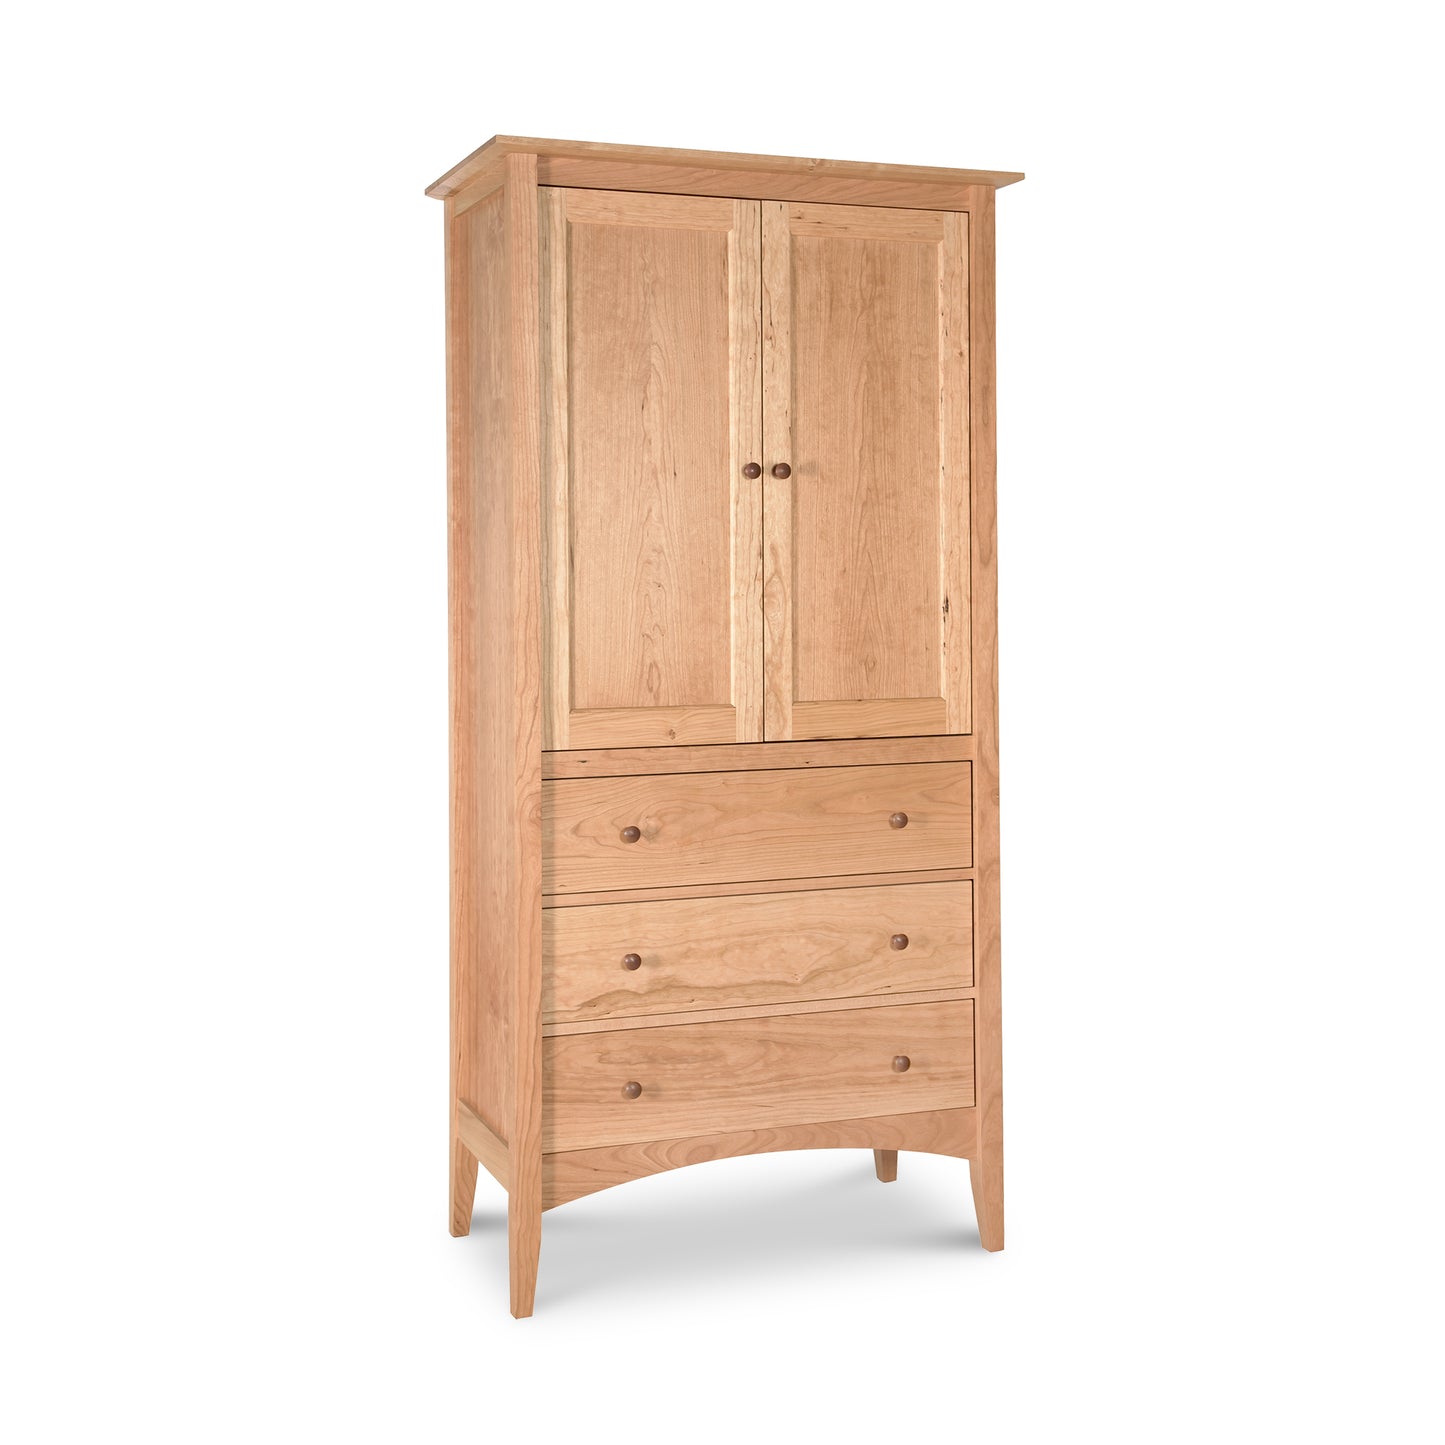 A Maple Corner Woodworks American Shaker Armoire with a two-door cabinet on top and three drawers below, all on tapered legs. The wood has a light natural finish and the hardware is minimalistic. This heirloom quality furniture.